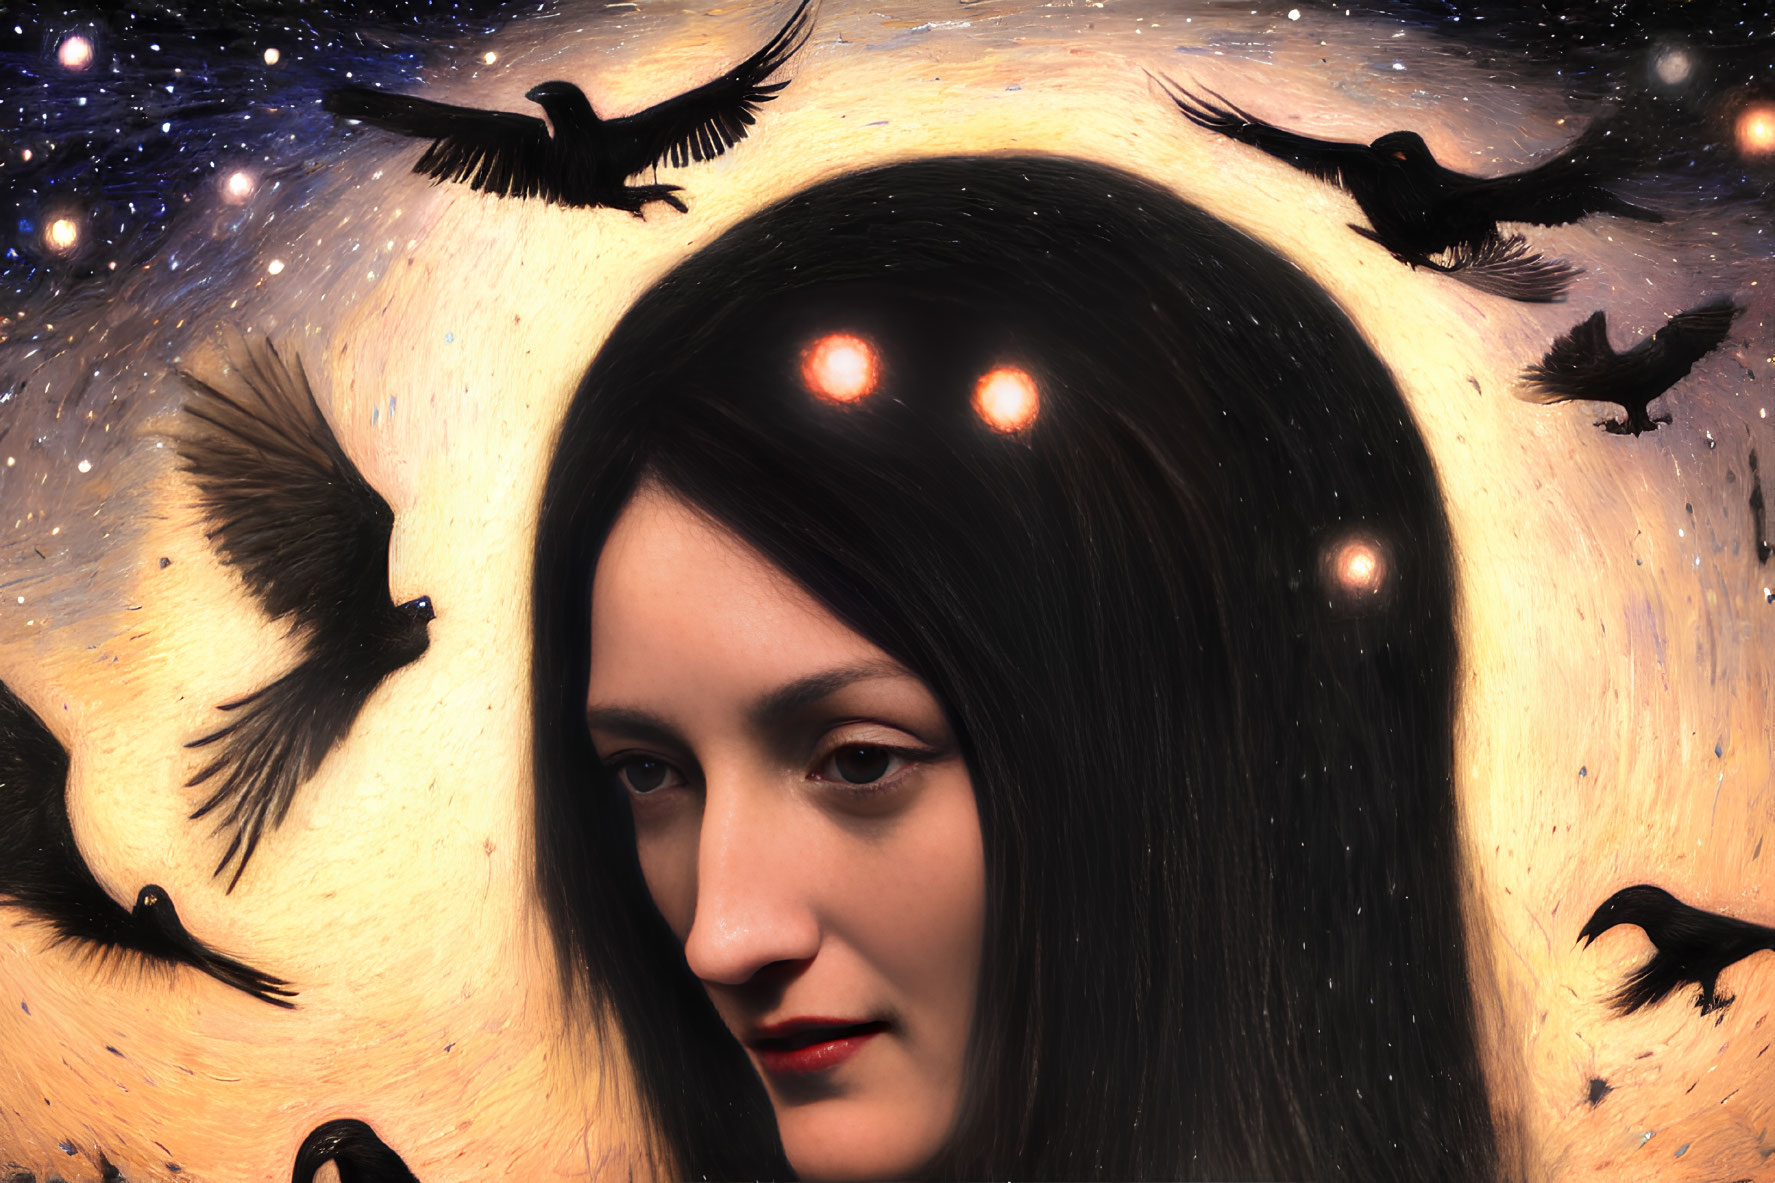 Dark-haired woman surrounded by flying black birds in surreal cosmic scene